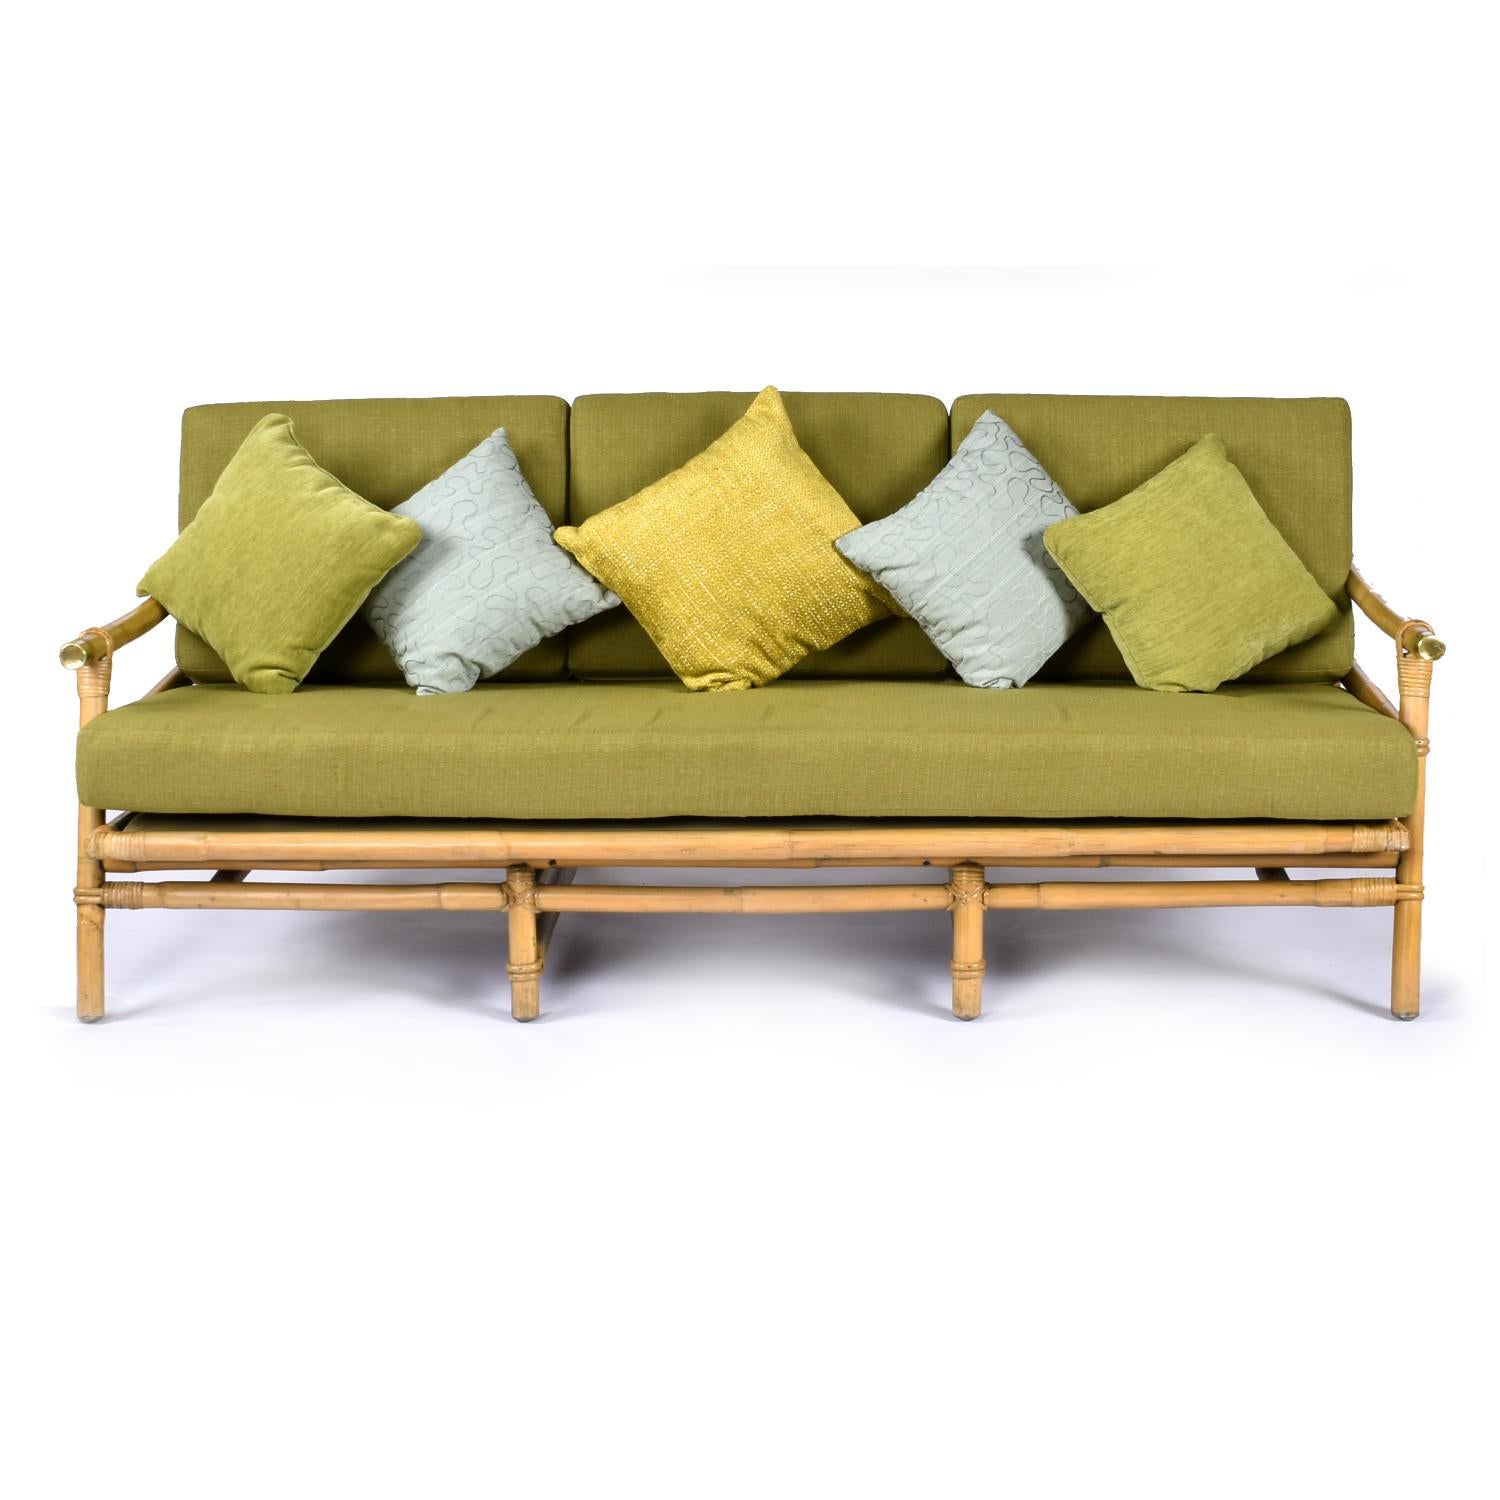 Luxurious bamboo sofa by John B. Wisner for Ficks Reed. Wisner’s “Far Horizons” collection was first introduced in 1954 and remains a desirable, timeless classic. Inspired by the tropical lands of the the East, this bamboo sofa features stylish